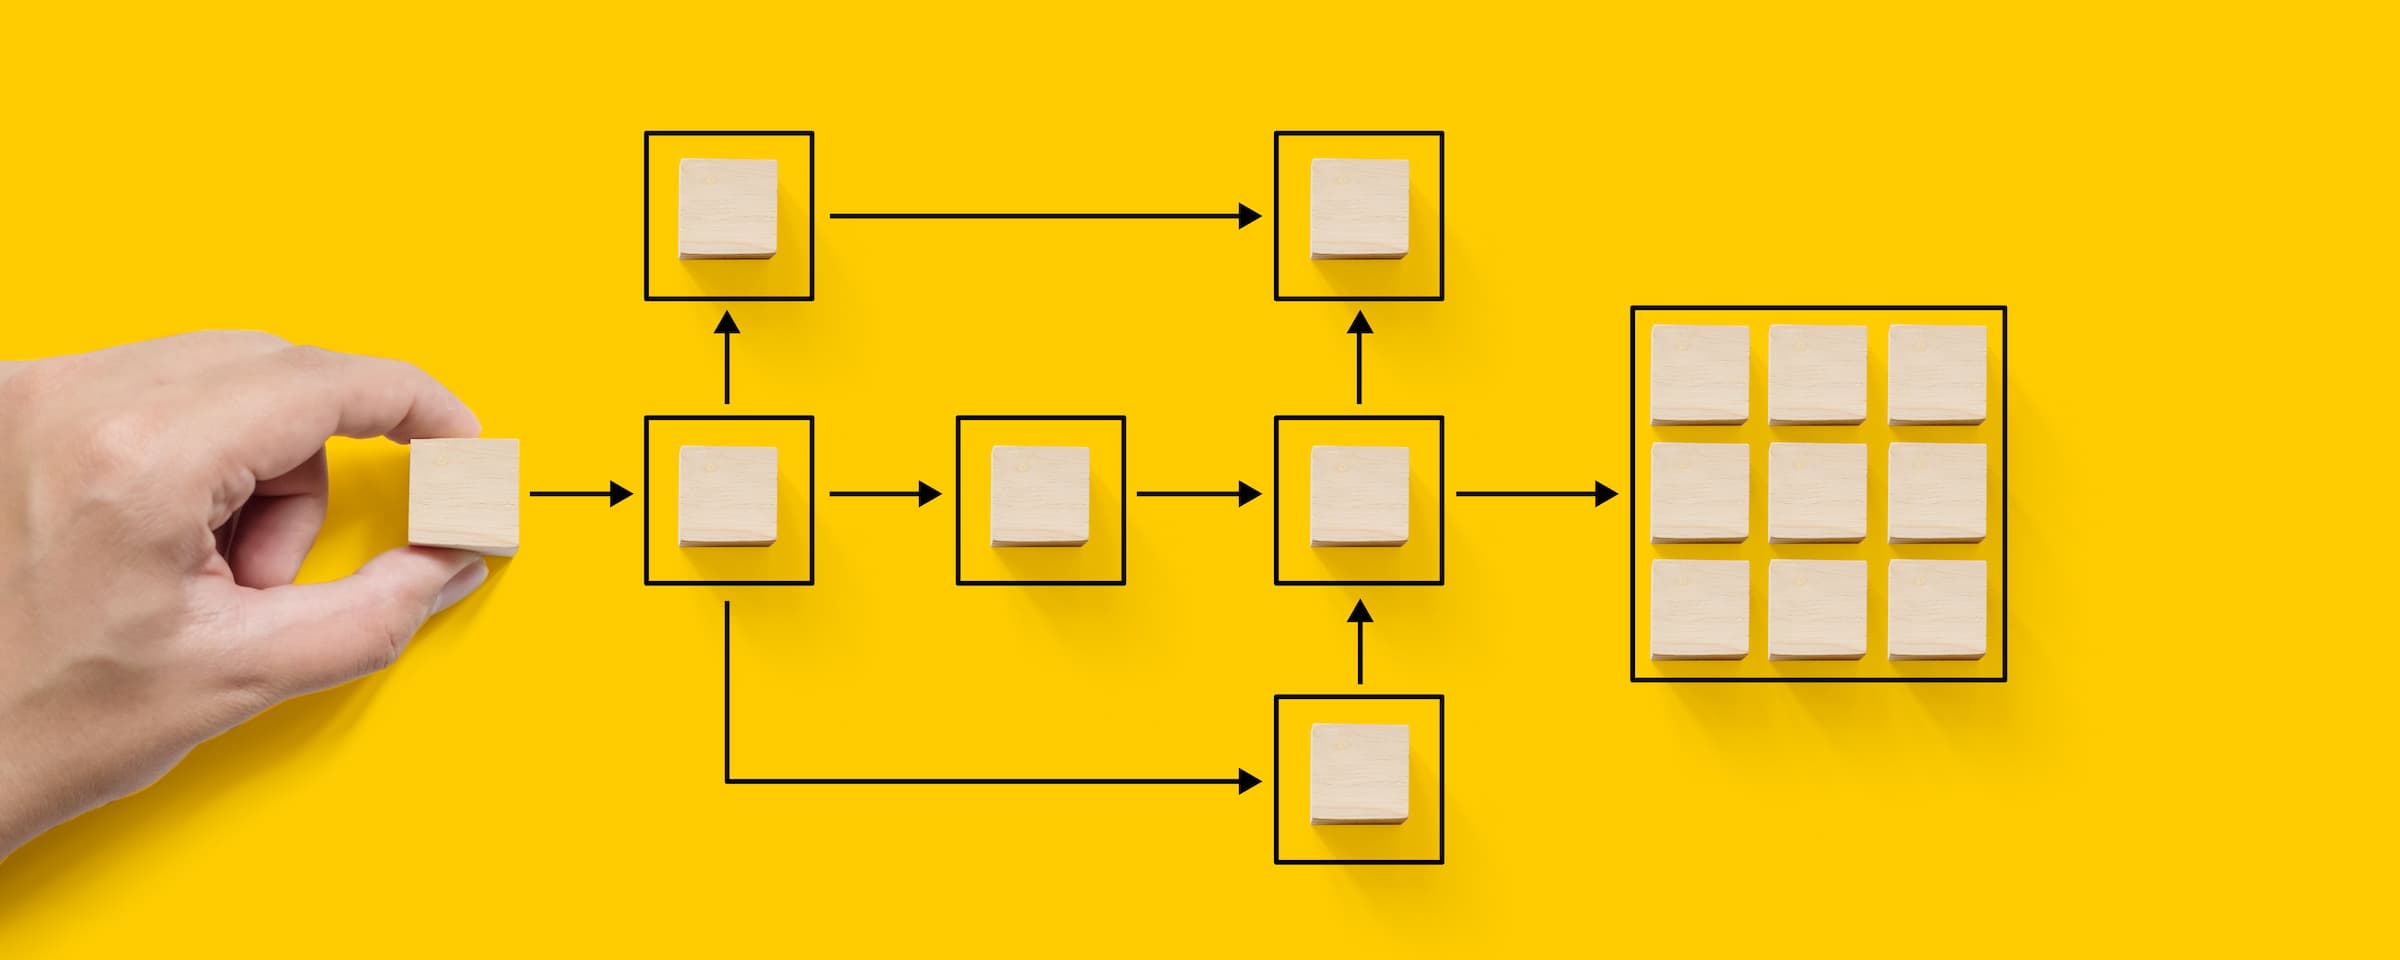 visual layout of organizing data structures